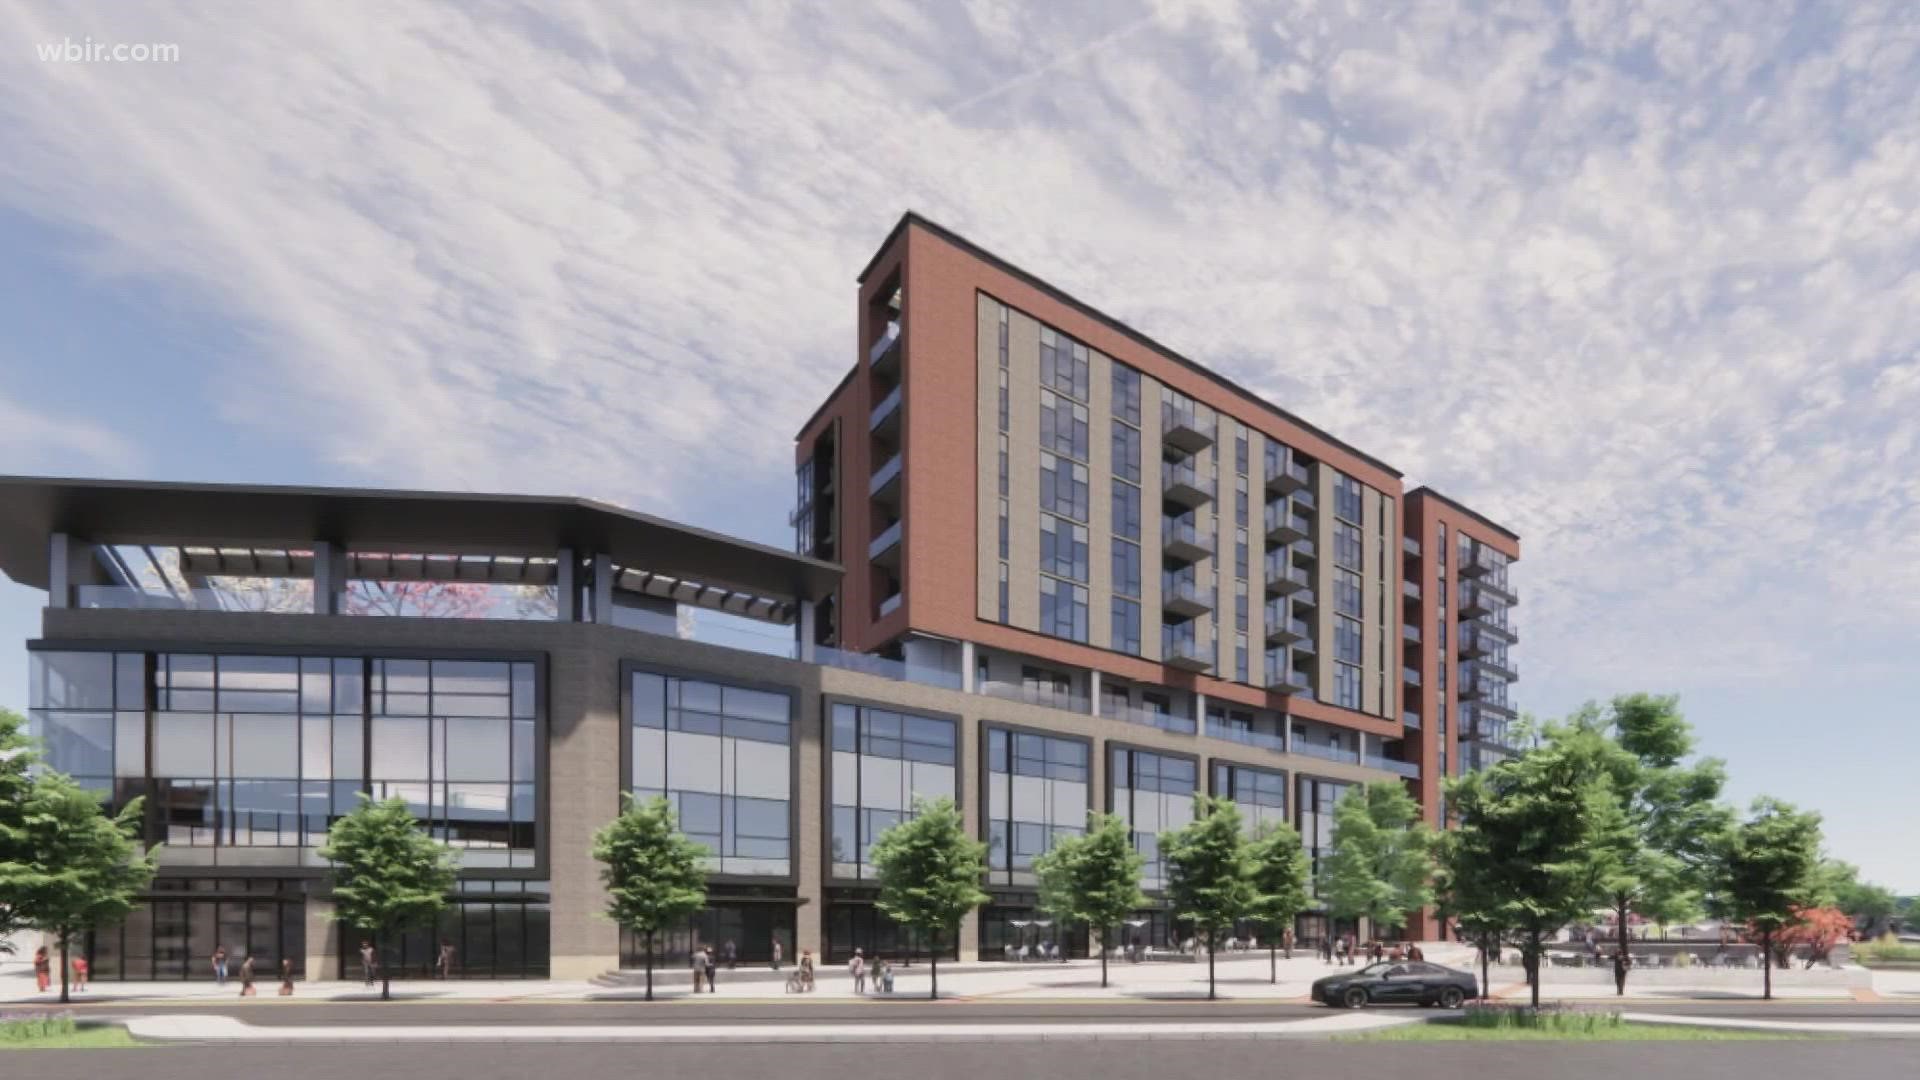 Developers say that the new properties being developed would bring more jobs to downtown Knoxville.